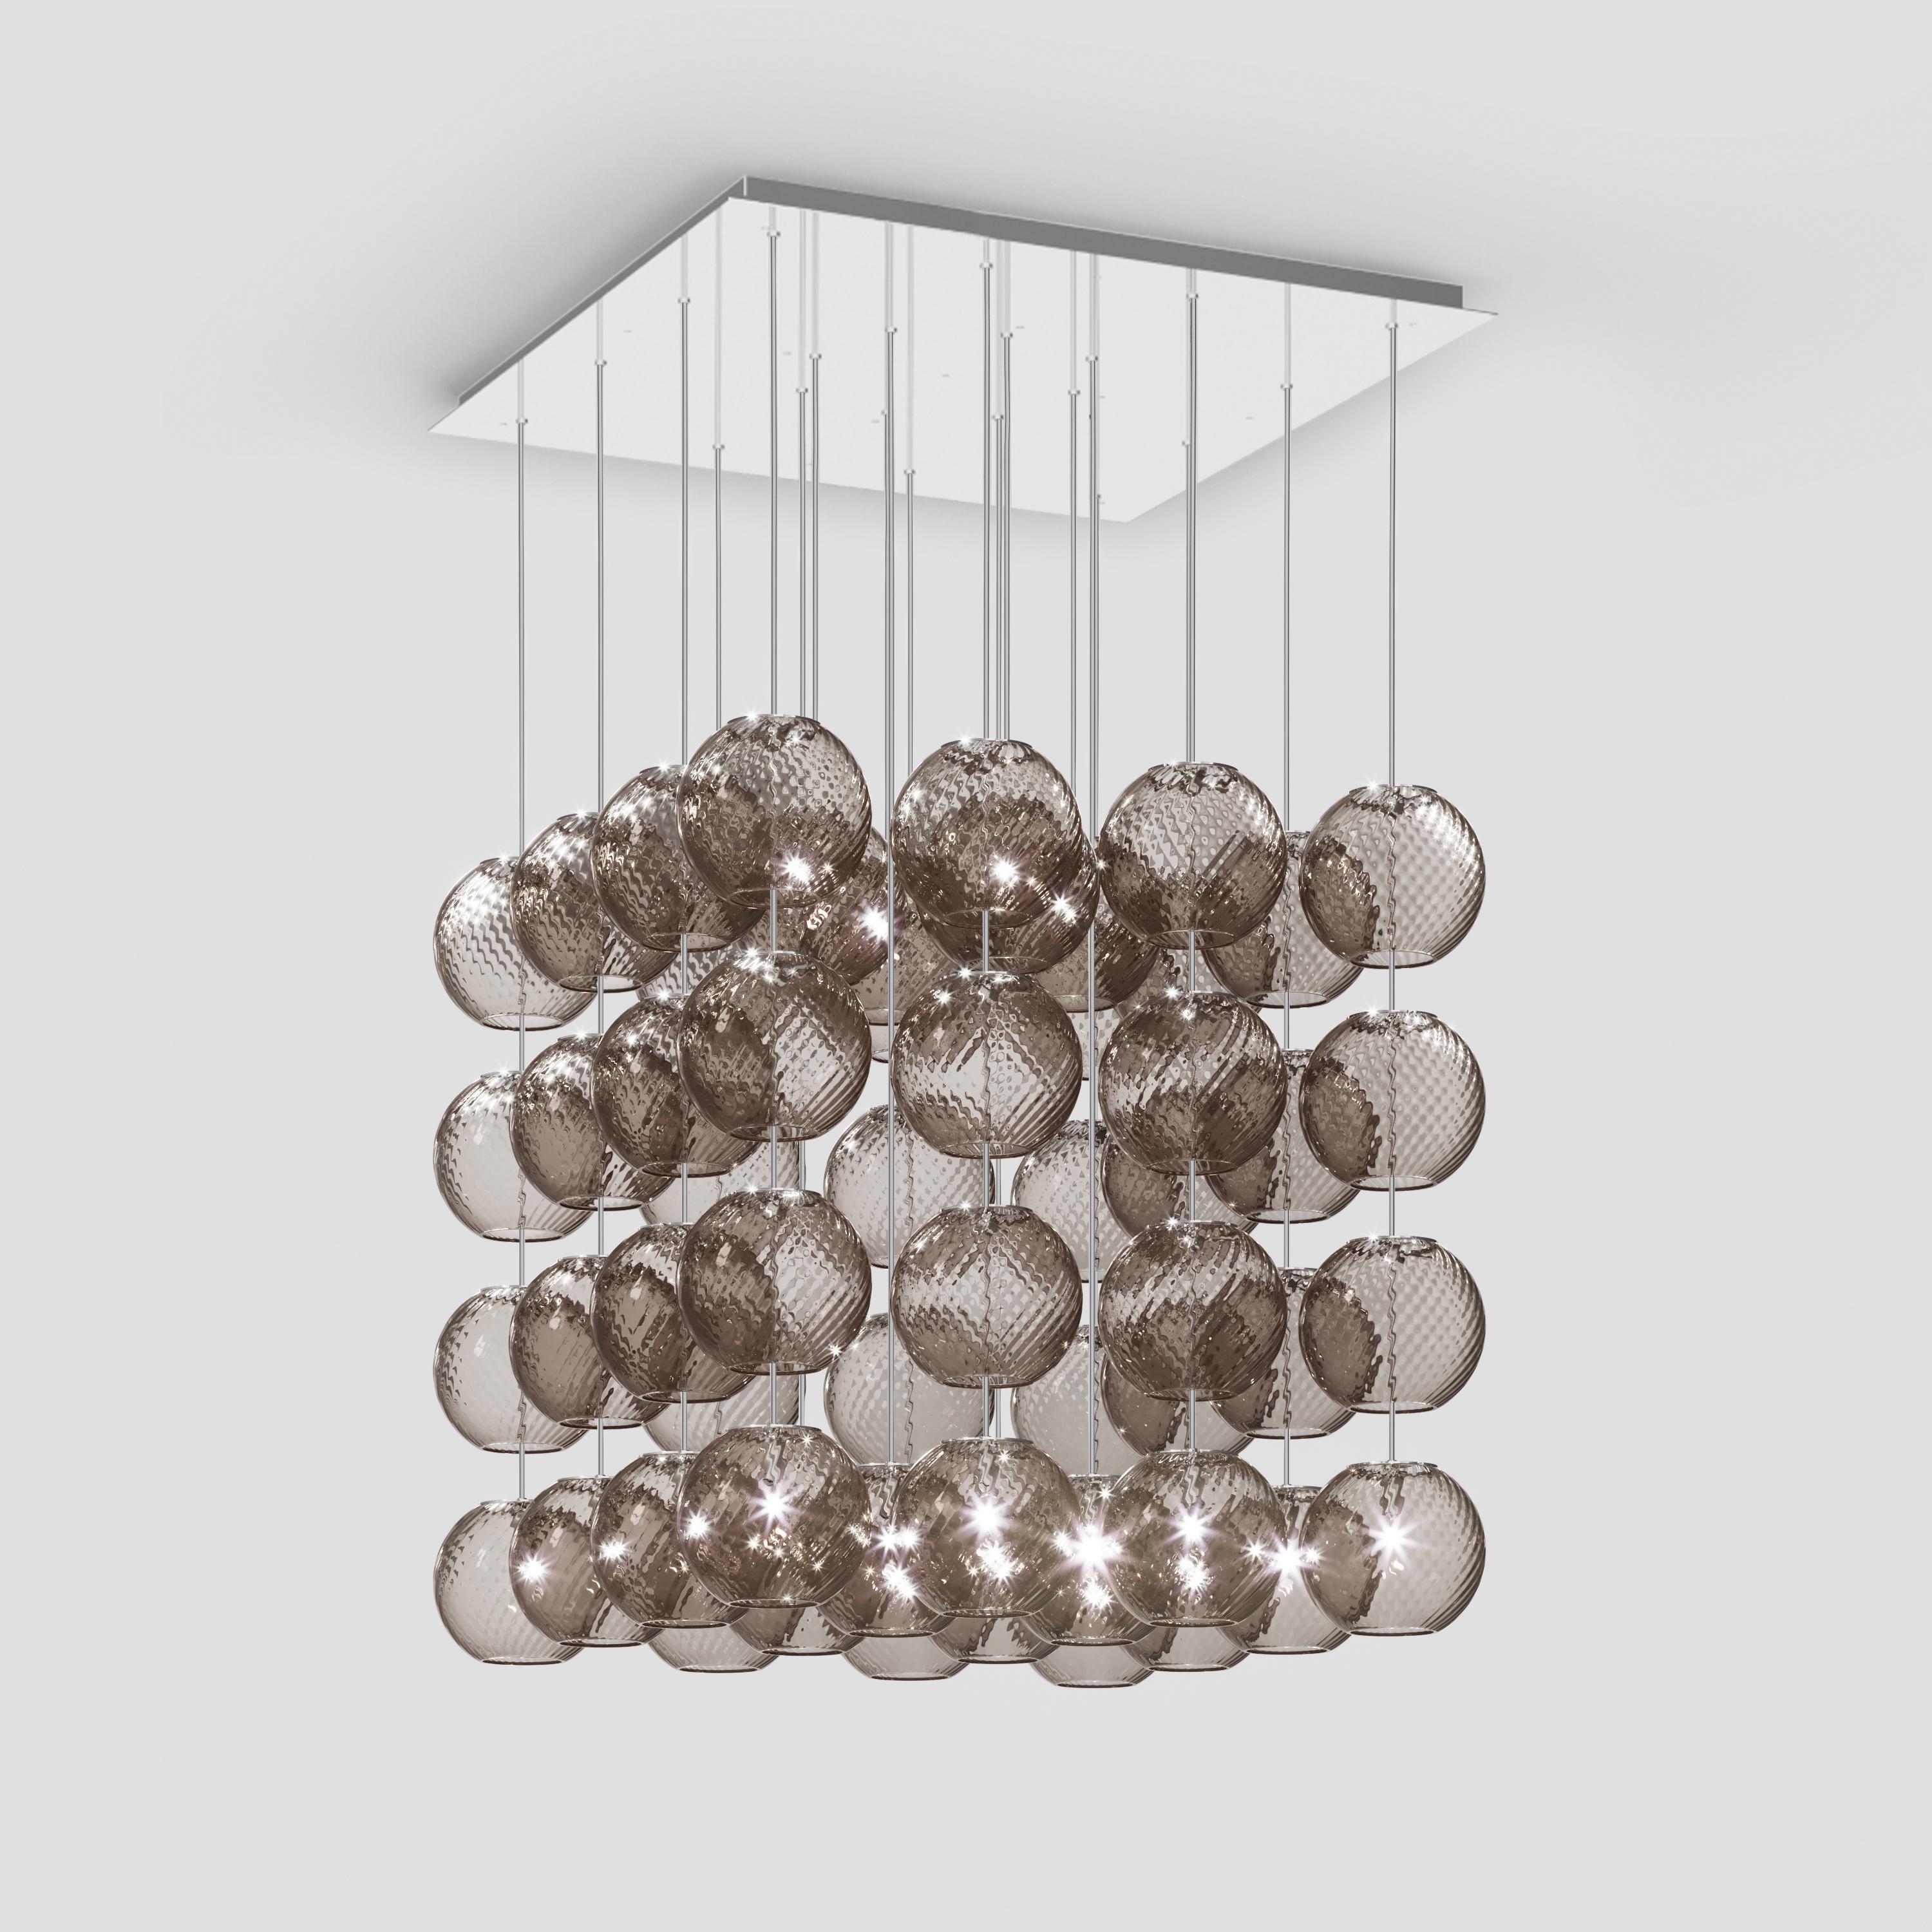 Spherical blown glass elements available in three sizes and four rigadin colours, with and without lighting source. The special design allows the vertical installation of several glass elements and infinite customized